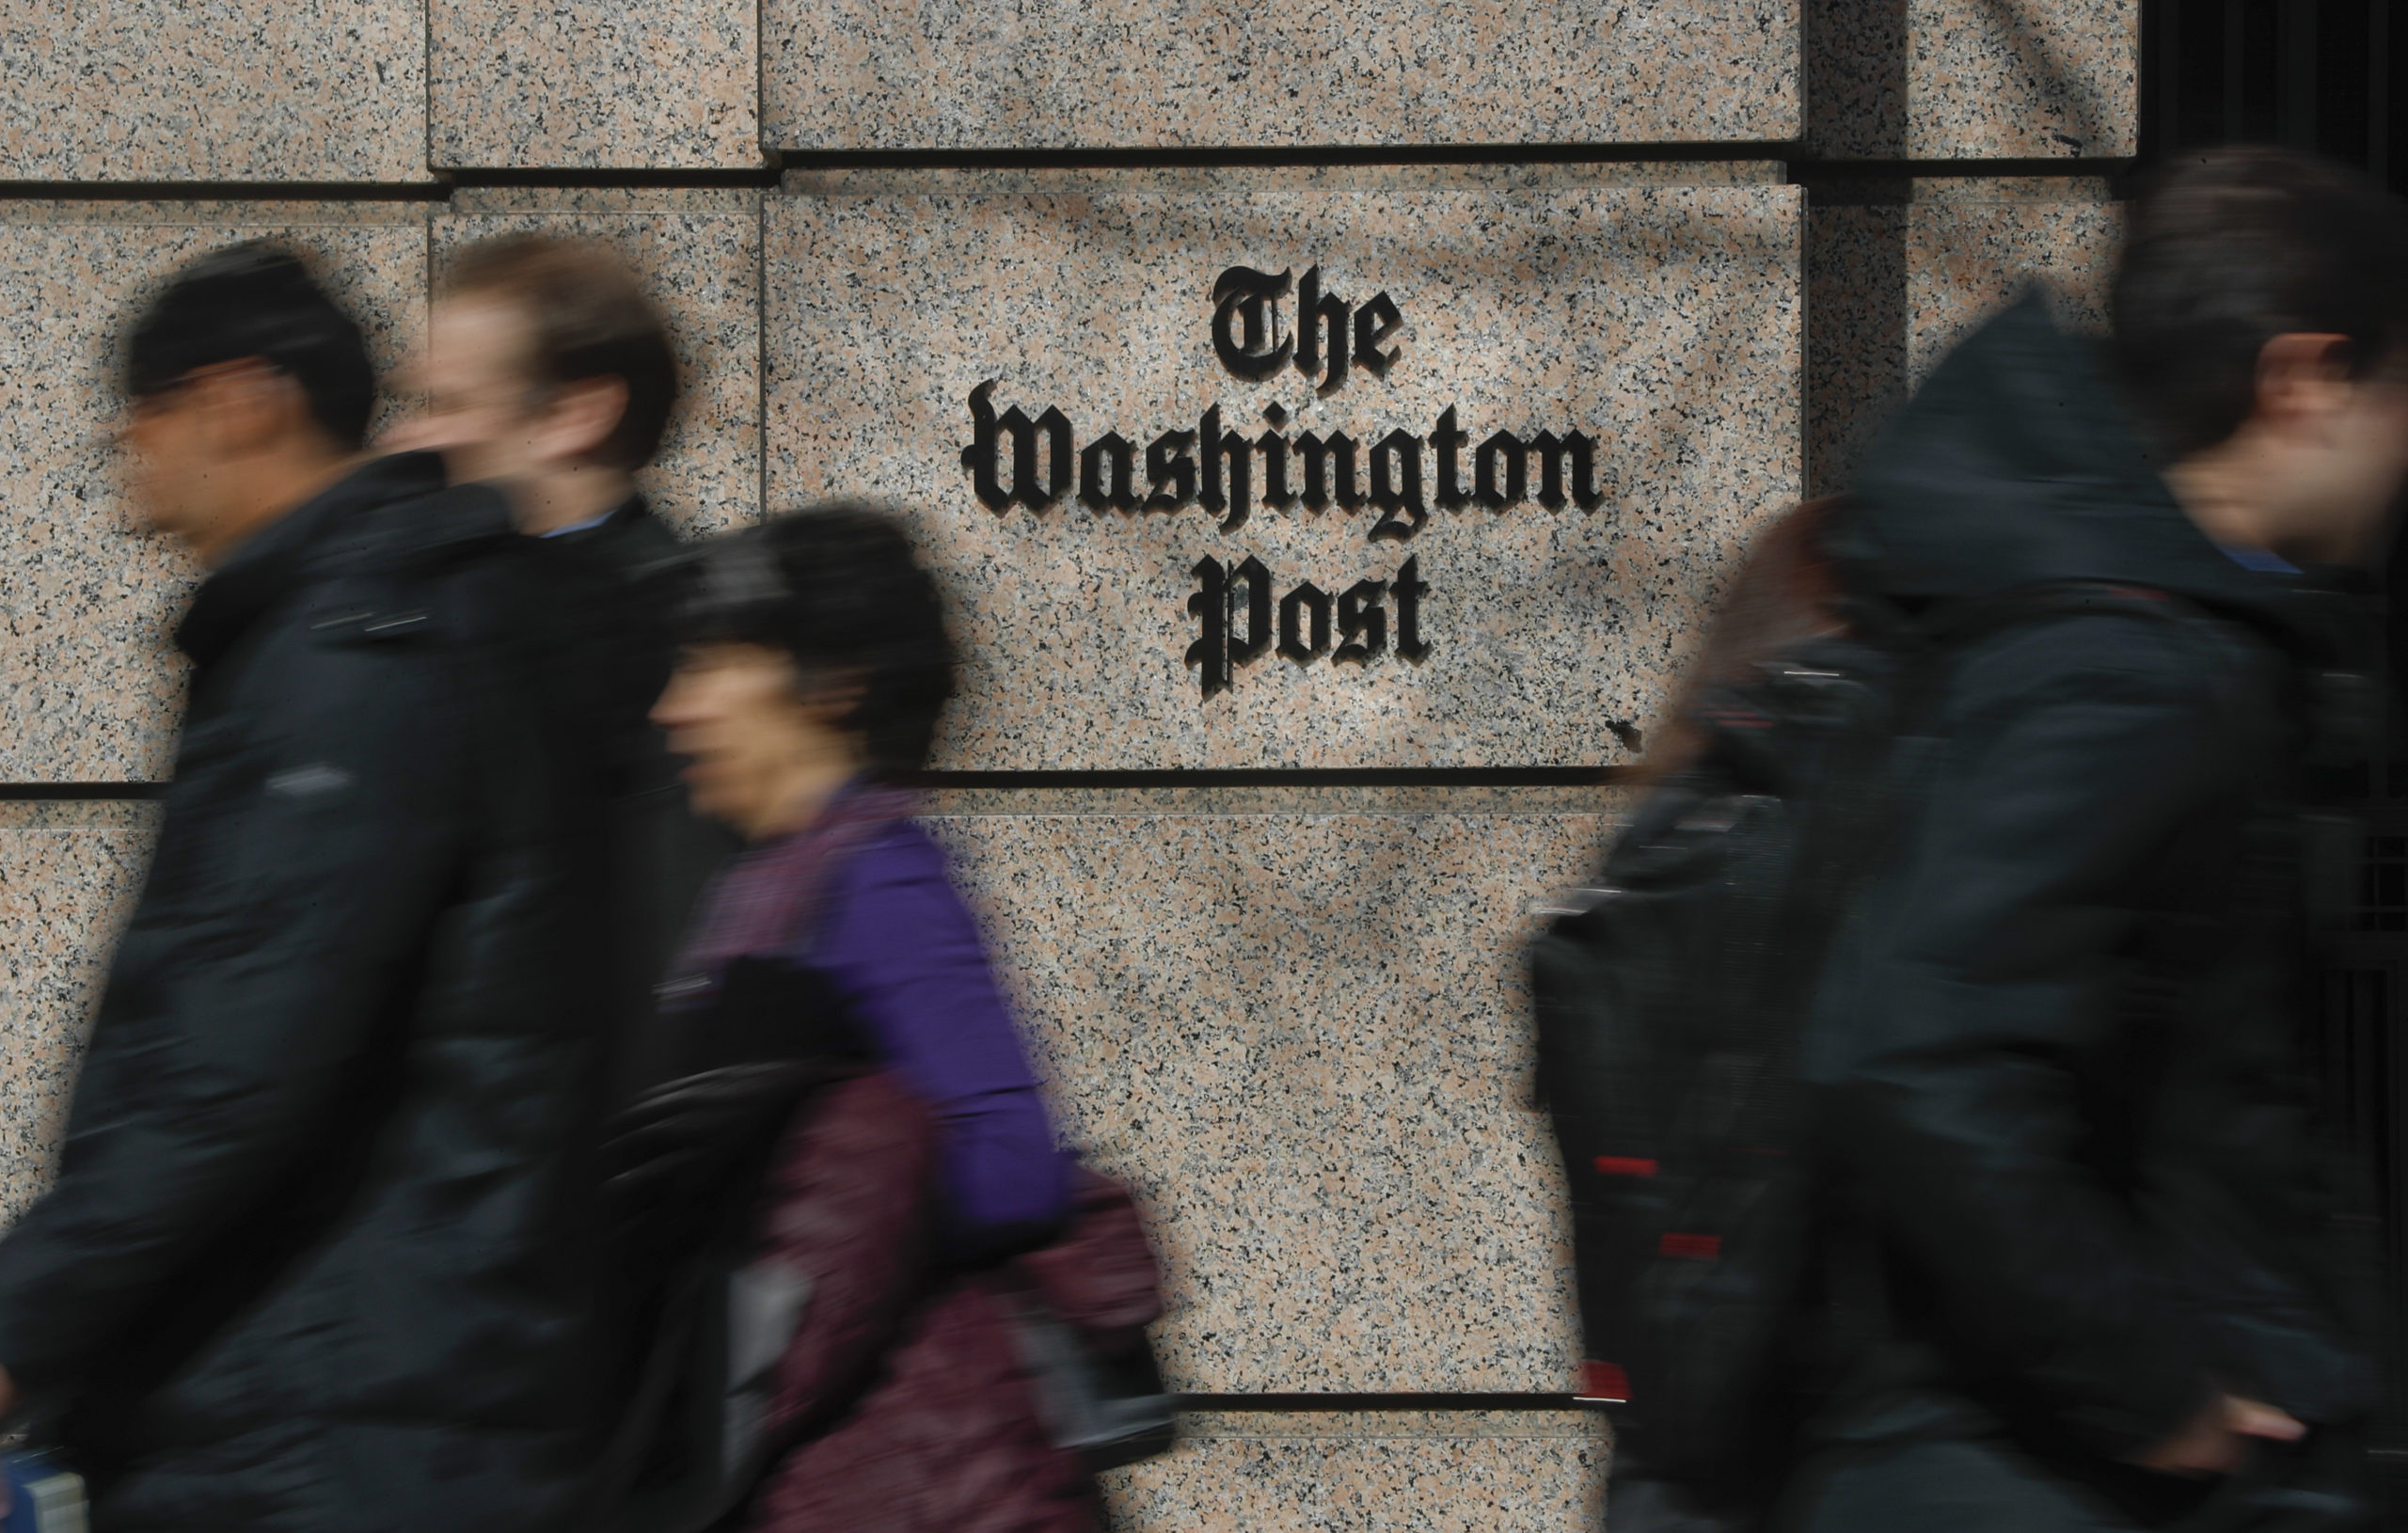 According to a leaked termination letter, Washington Post reporter Felicia Sonmez was fired for, among other things, “insubordination.” But insubordination is a tool of necessity, used by every trailblazing journalist or activist working to change an unjust system.